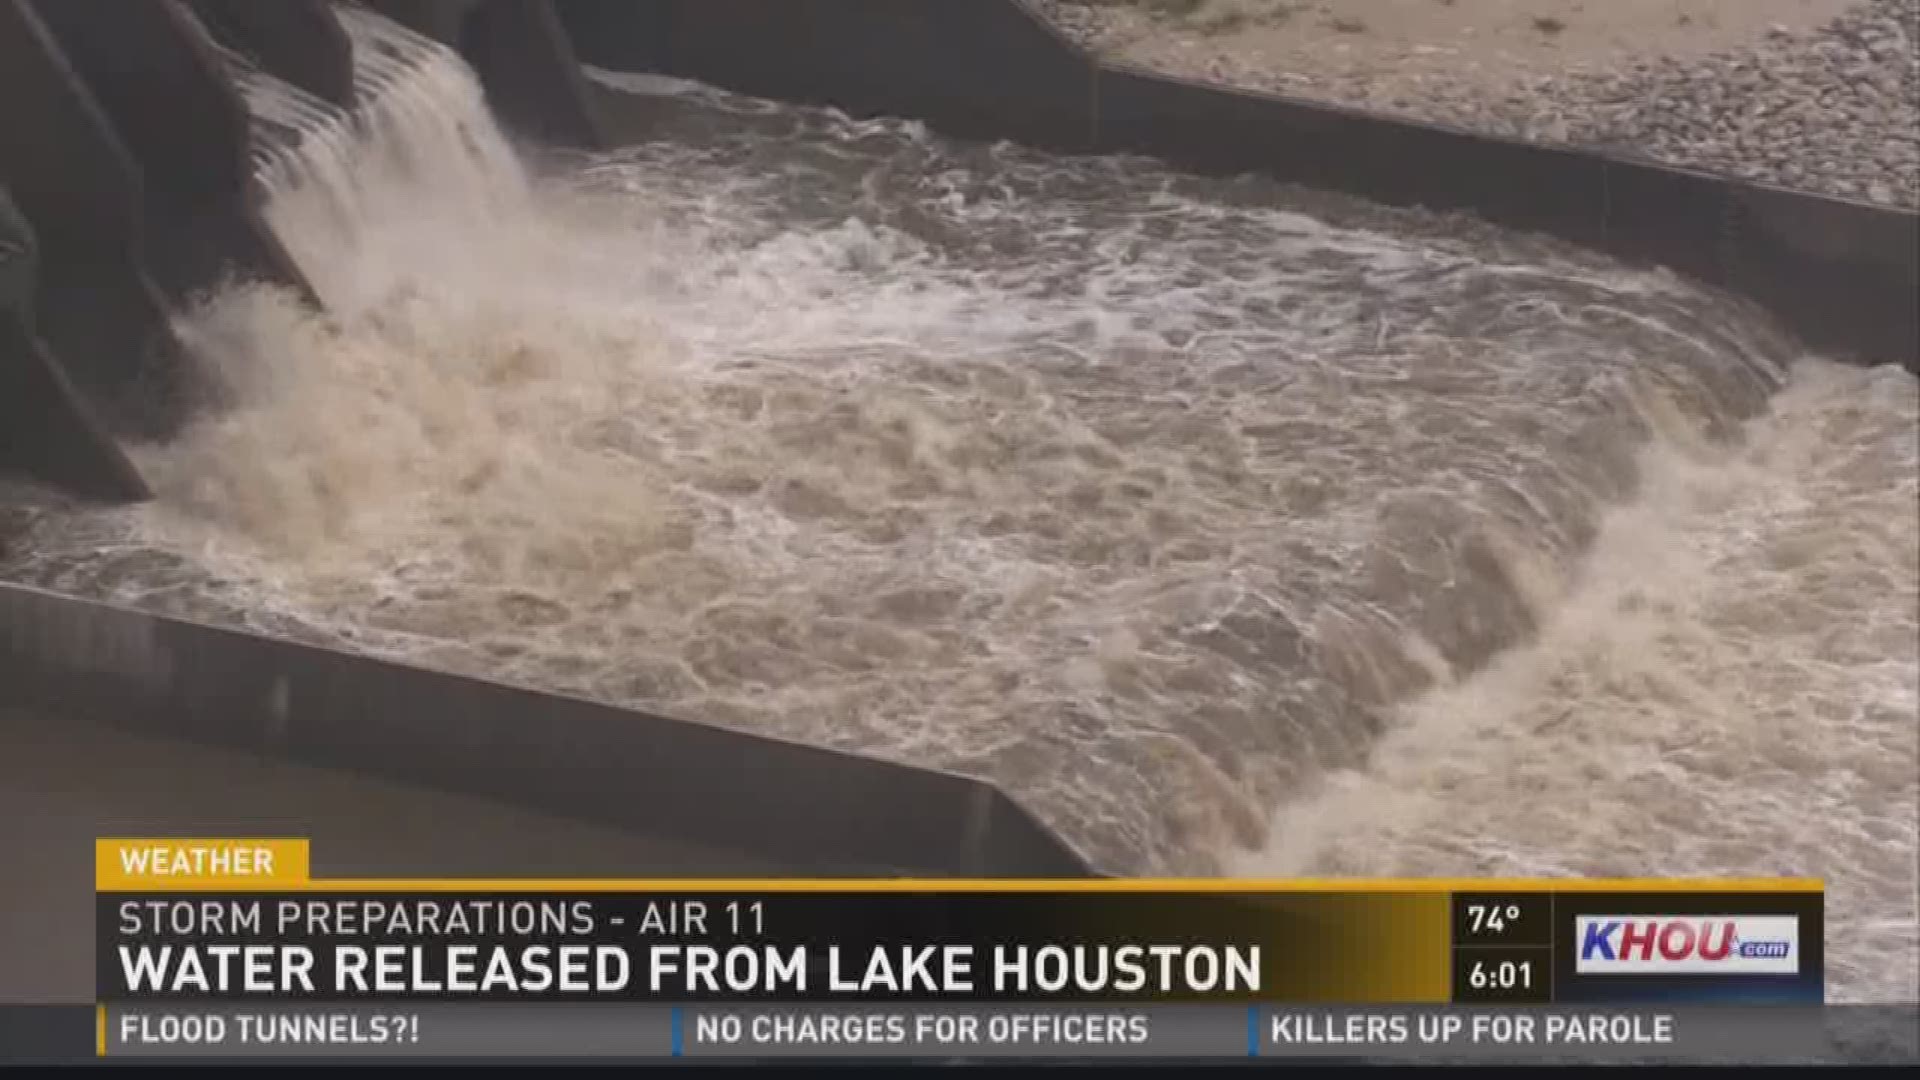 Lake Houston's water level is being reduced by 2.5 feet to address flooding concerns of surrounding communities including Kingwood, Humble, Atascocita and Huffman. Air 11 flew over the lake Tuesday afternoon as the Coastal Water Authority starting lowerin